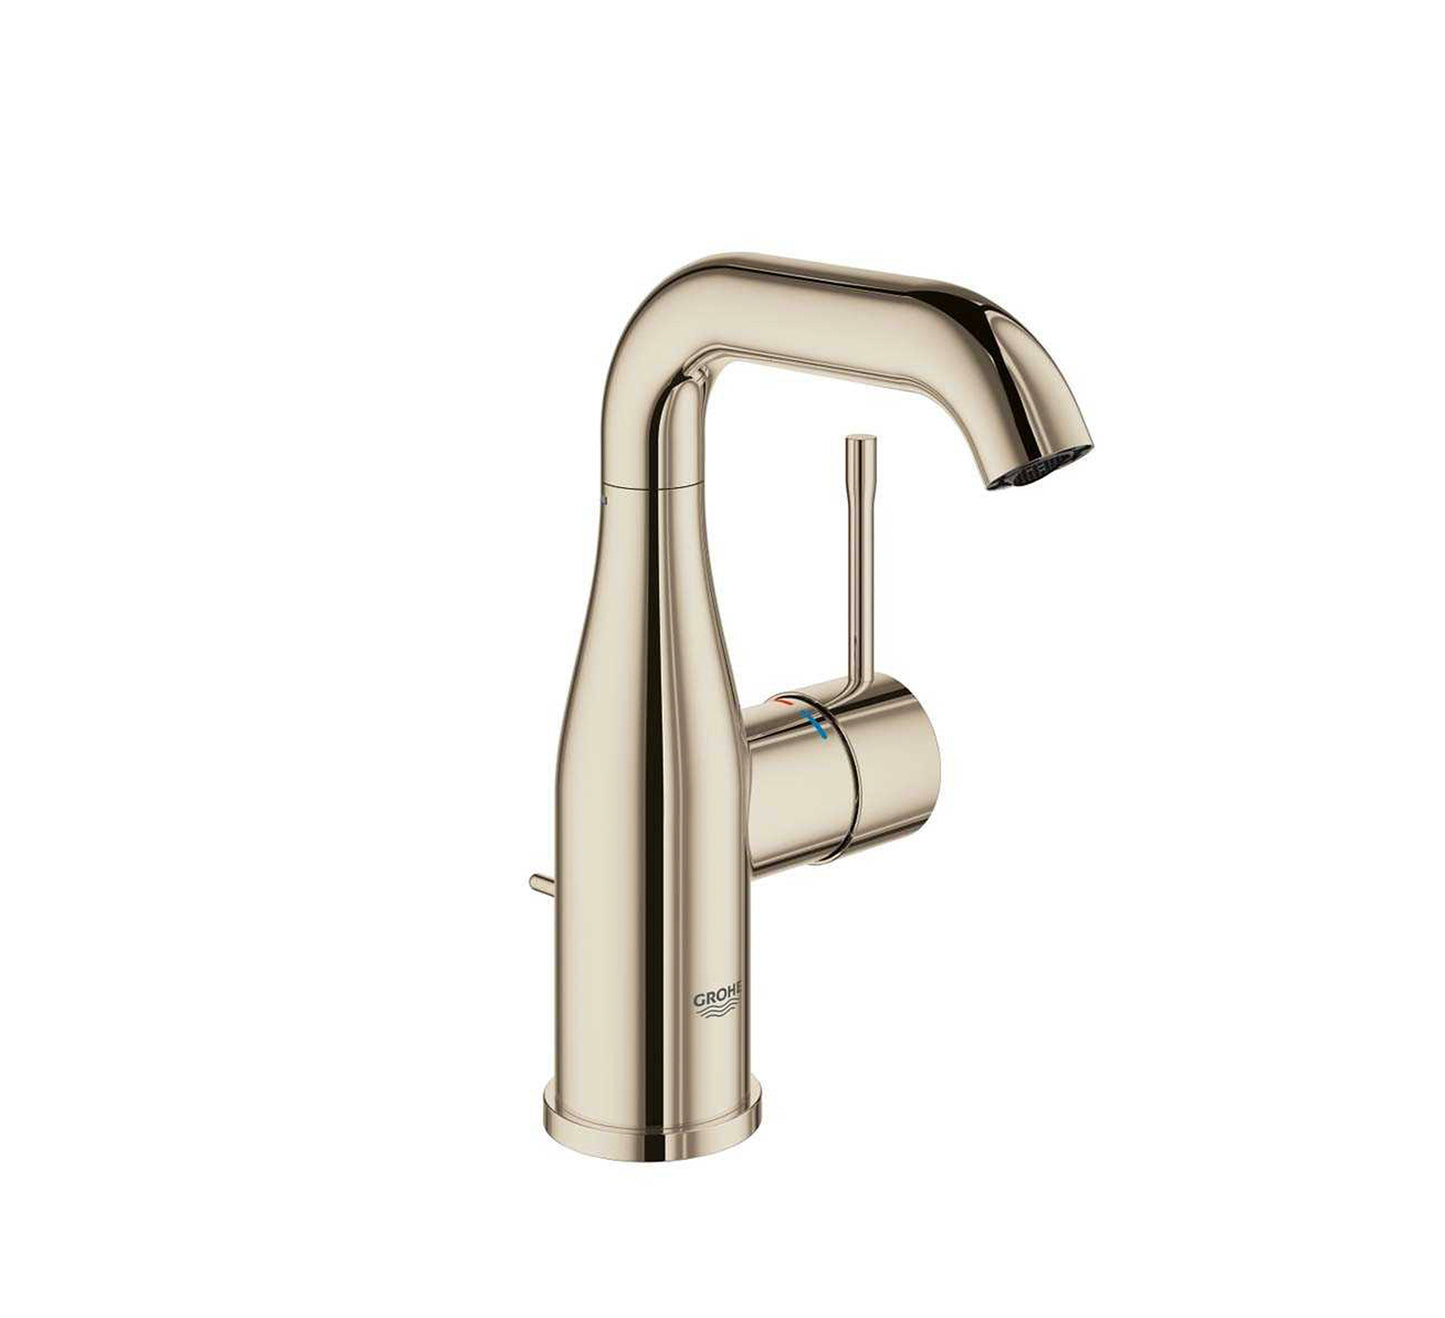 GROHE ESSENCE NEW BASIN MIXER POLISHED NICKLE - 23462BE1